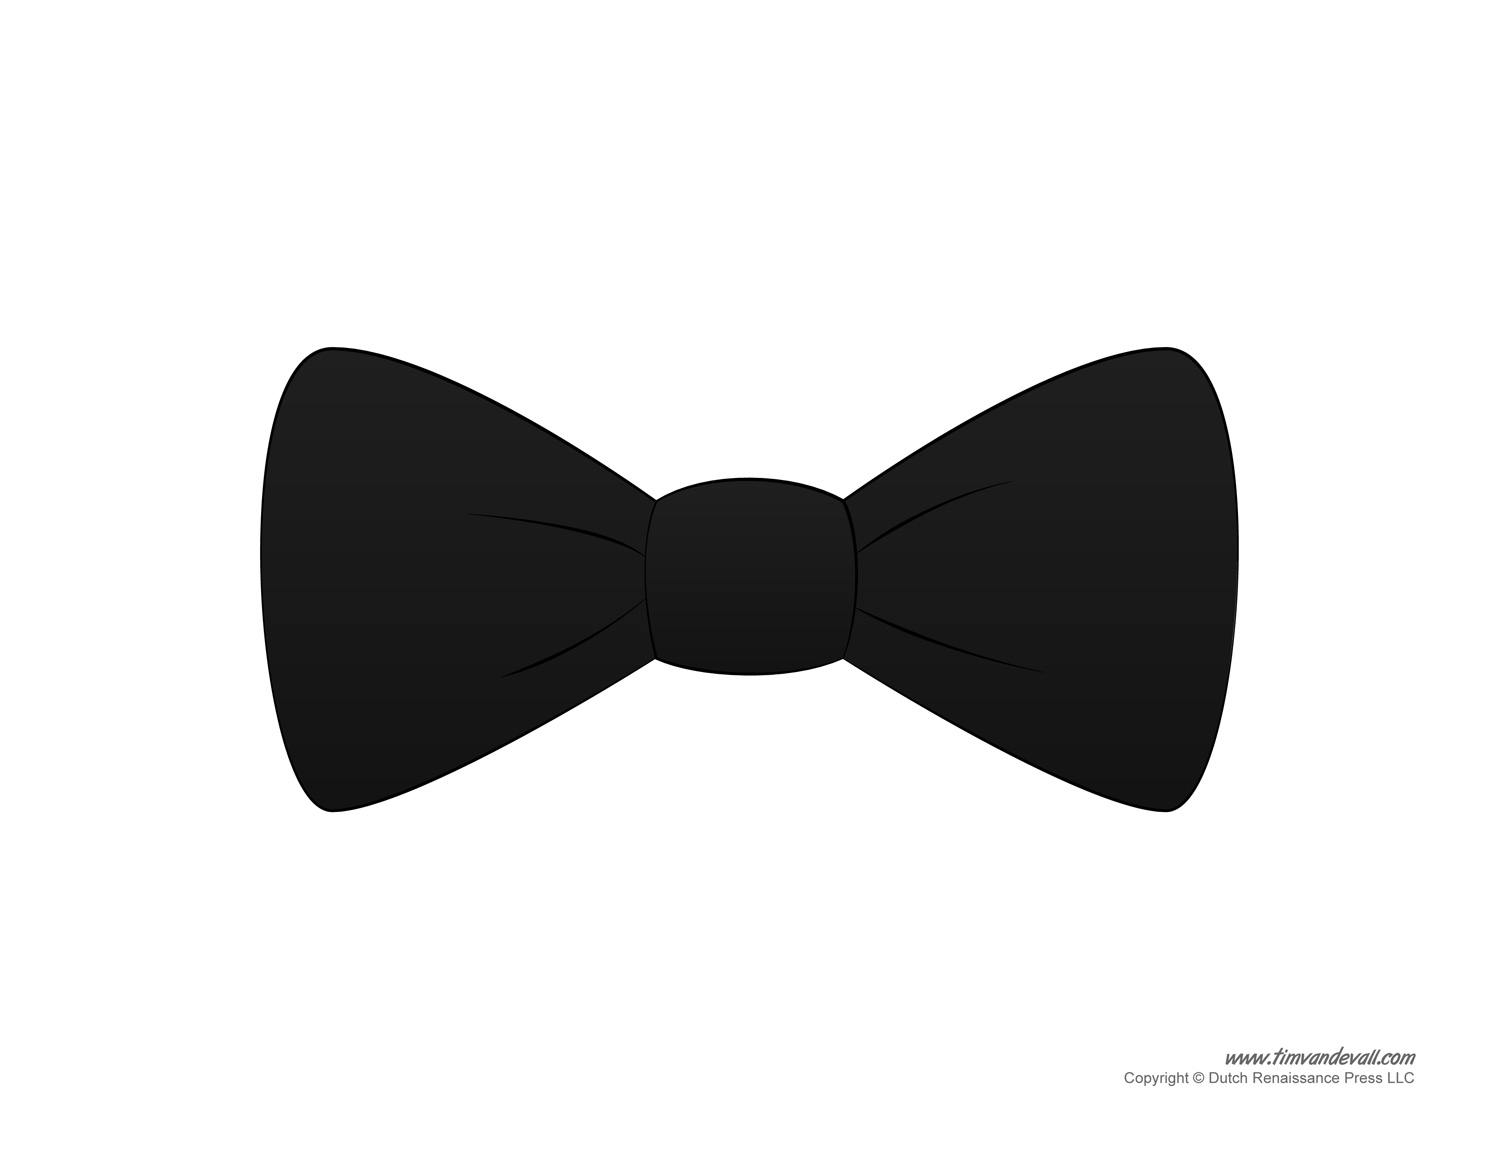 Doodles Sketch Bow, Bow Tie, Icon On White Background Royalty Free SVG,  Cliparts, Vectors, and Stock Illustration. Image 132678605.